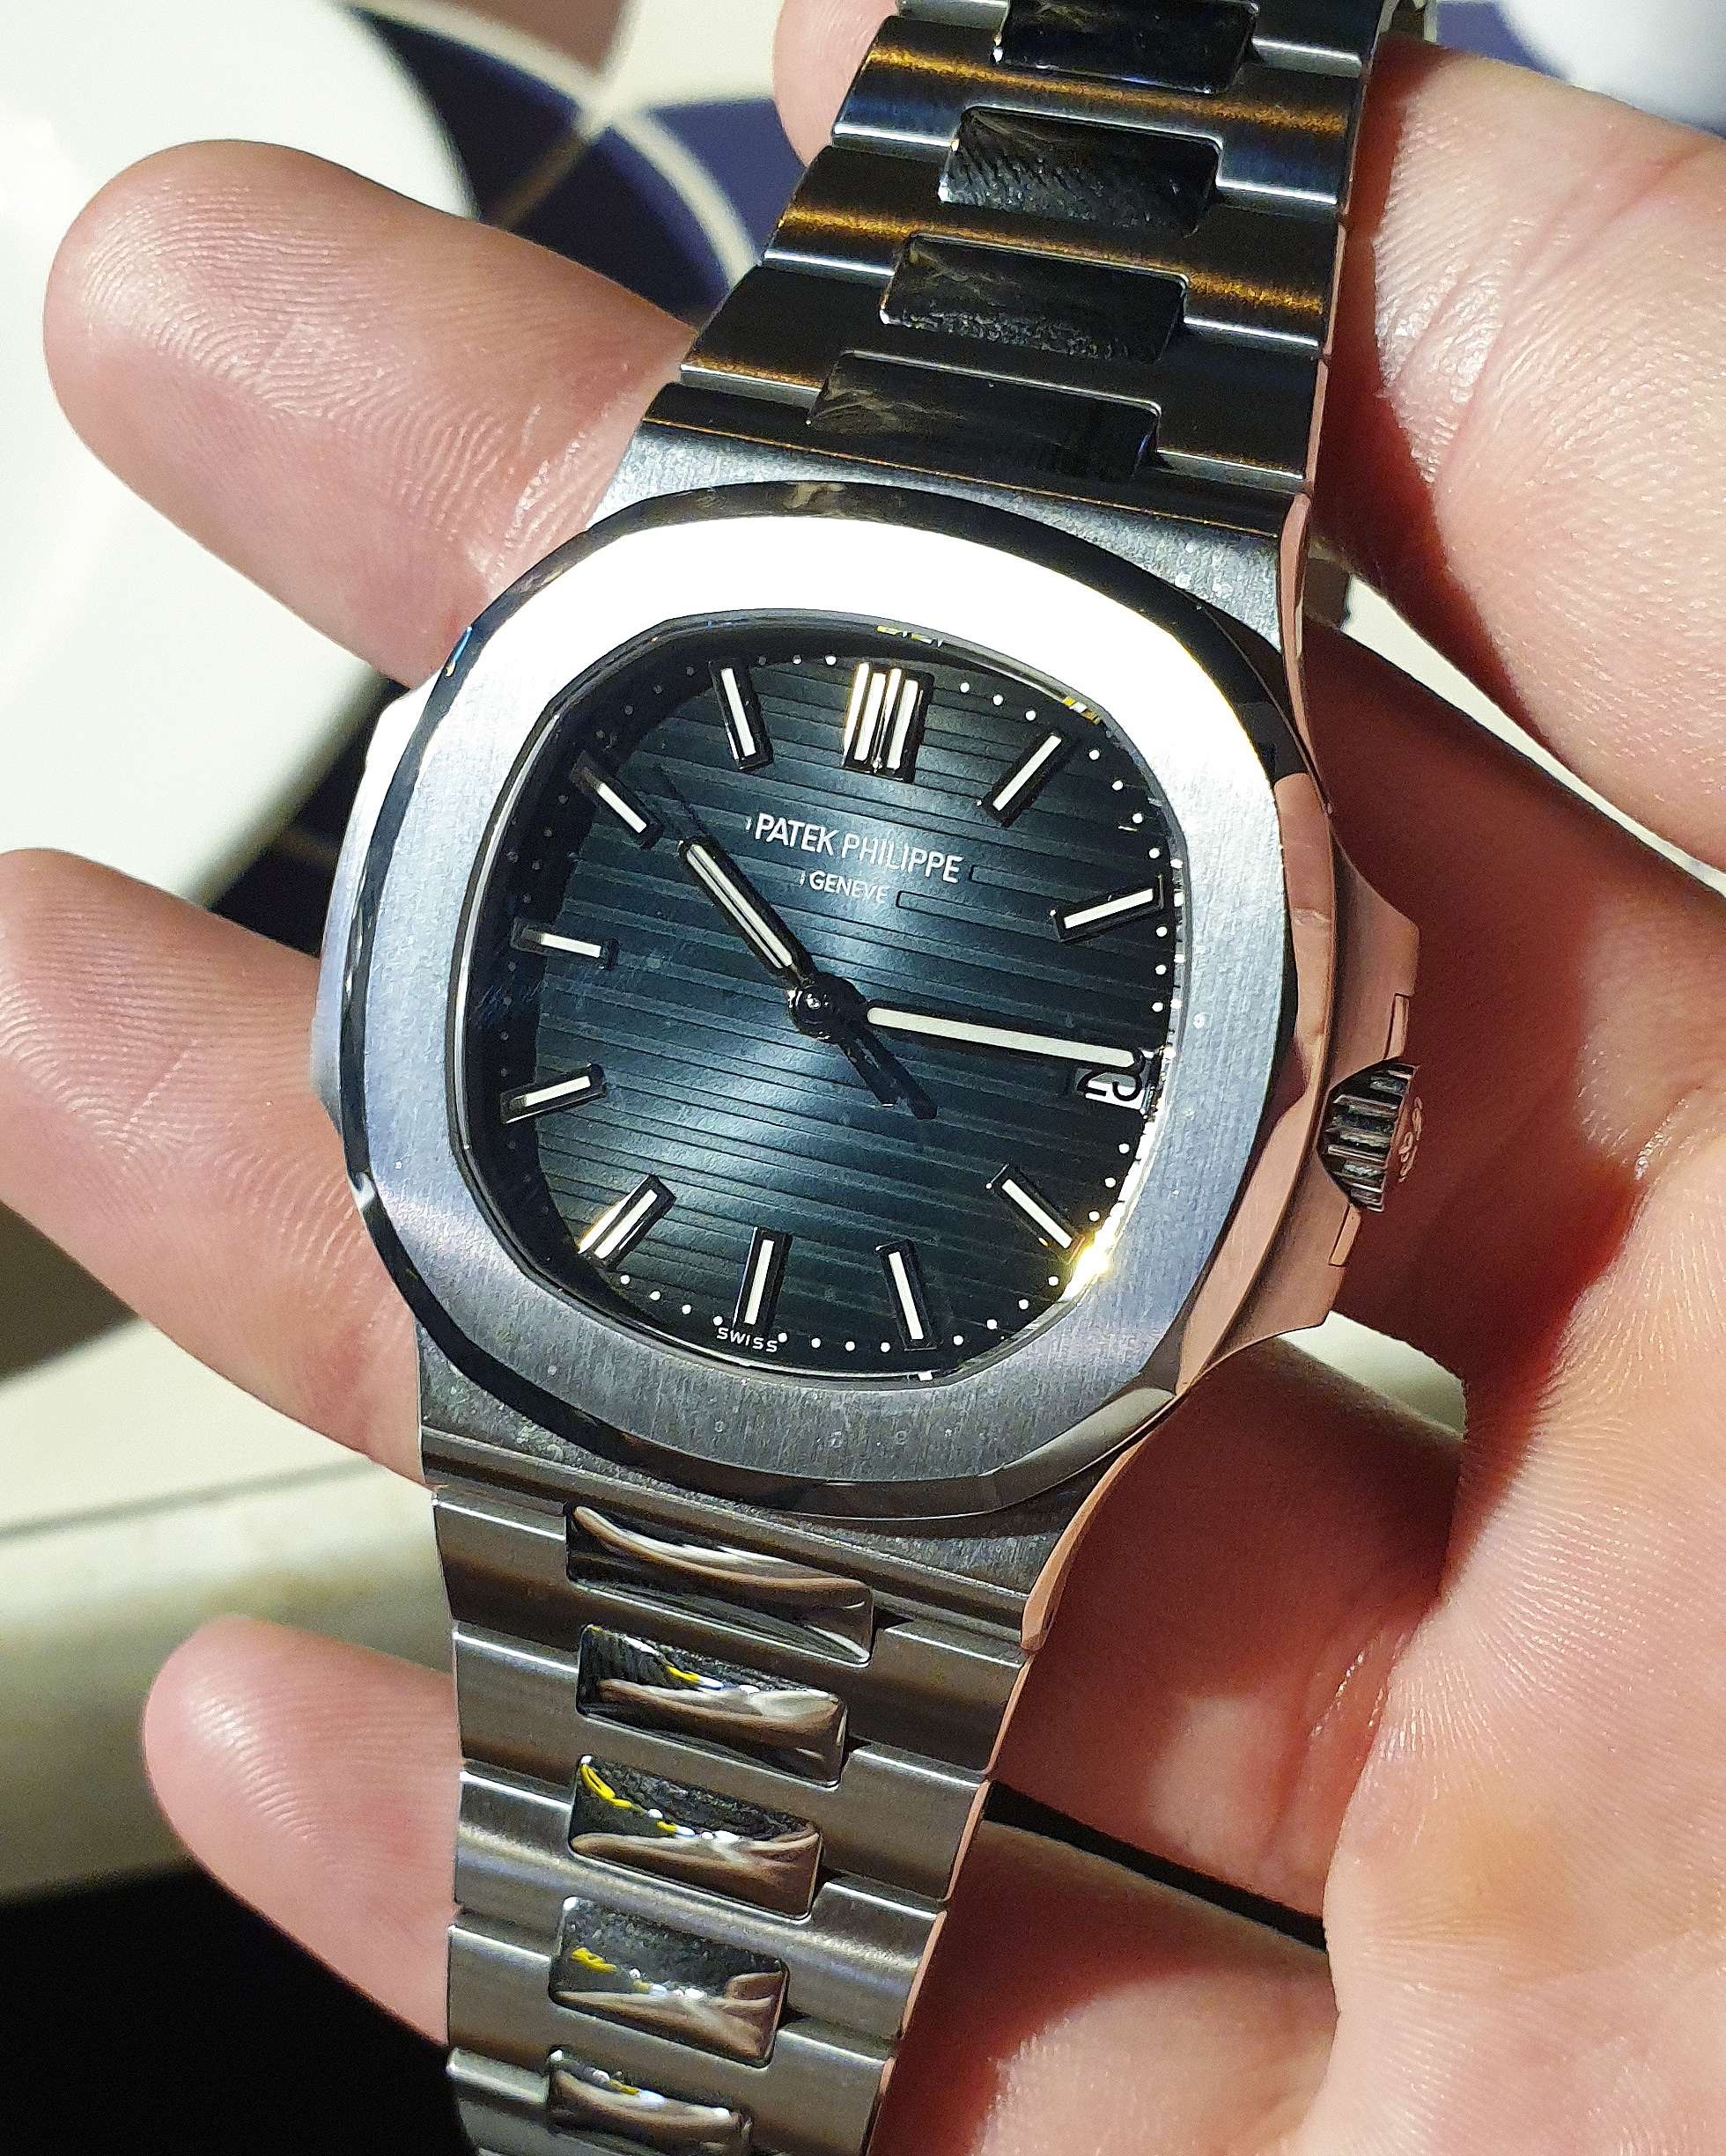 Interview: Thierry Stern on Patek Philippe and its Legacy of